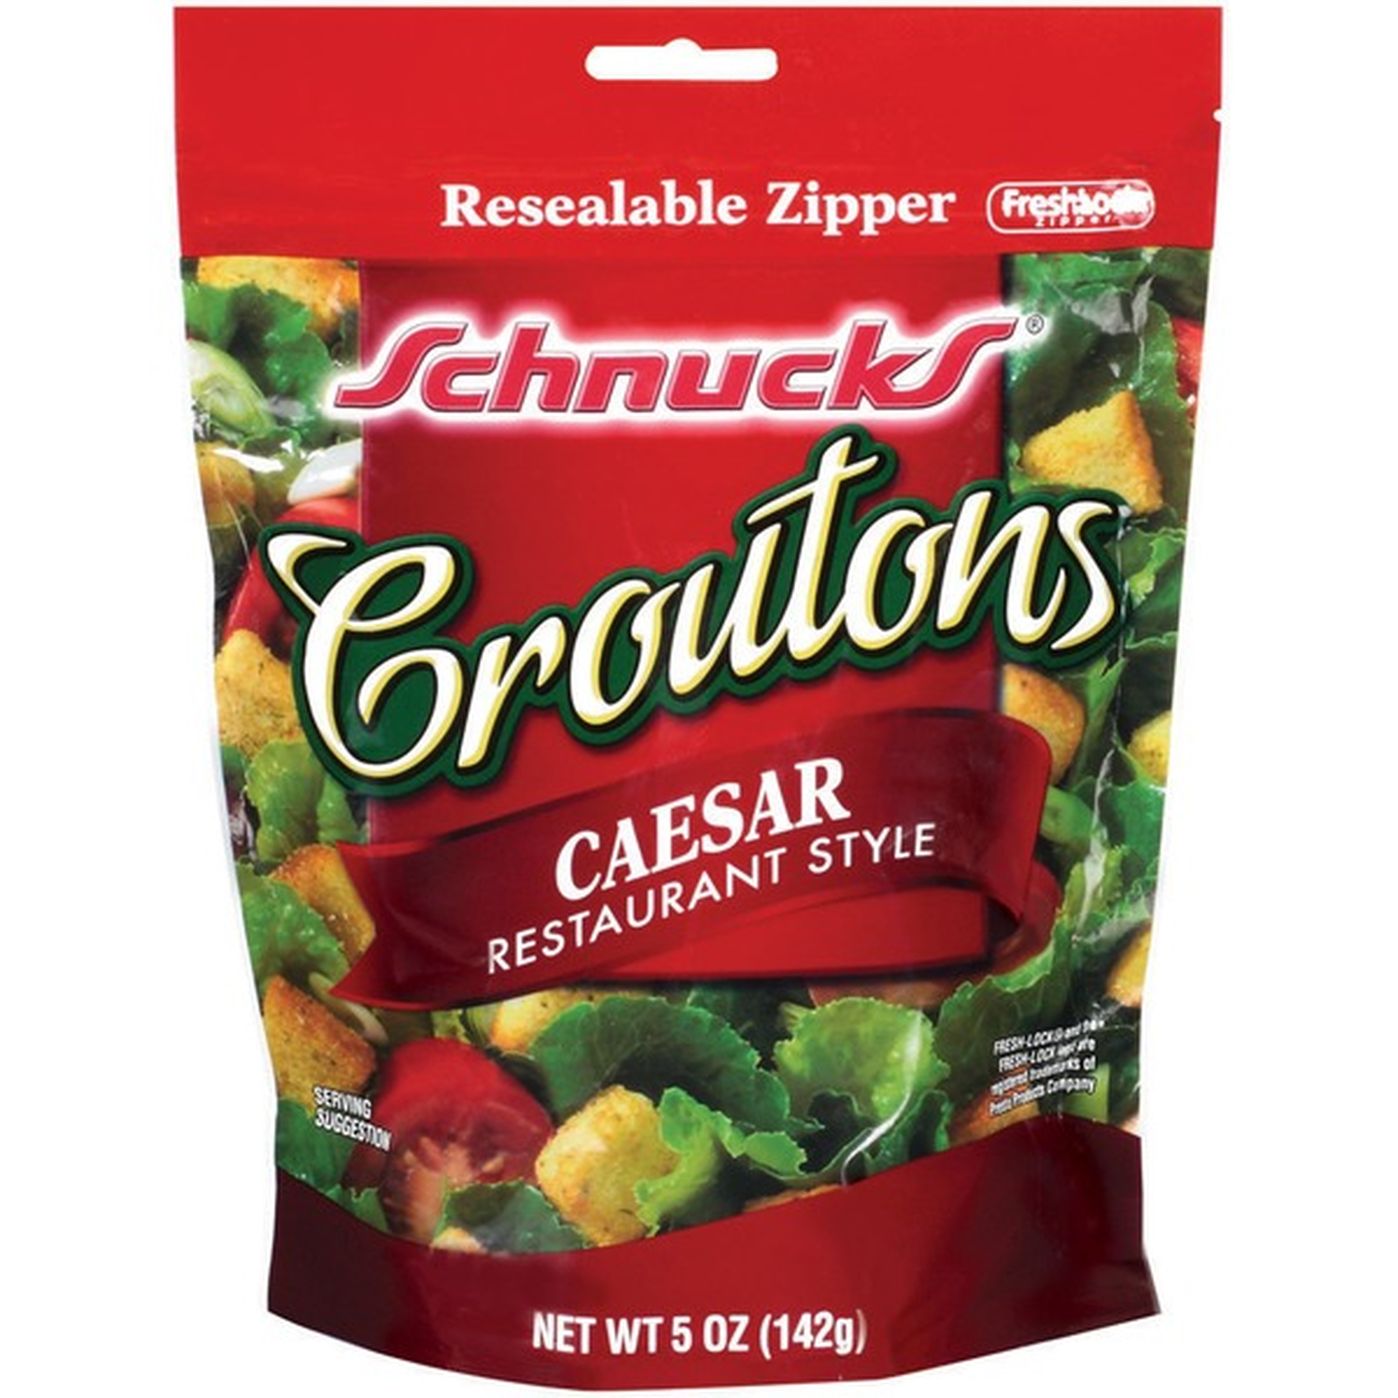 Schnucks Caesar Restaurant Style Croutons (5 oz) Delivery or Pickup